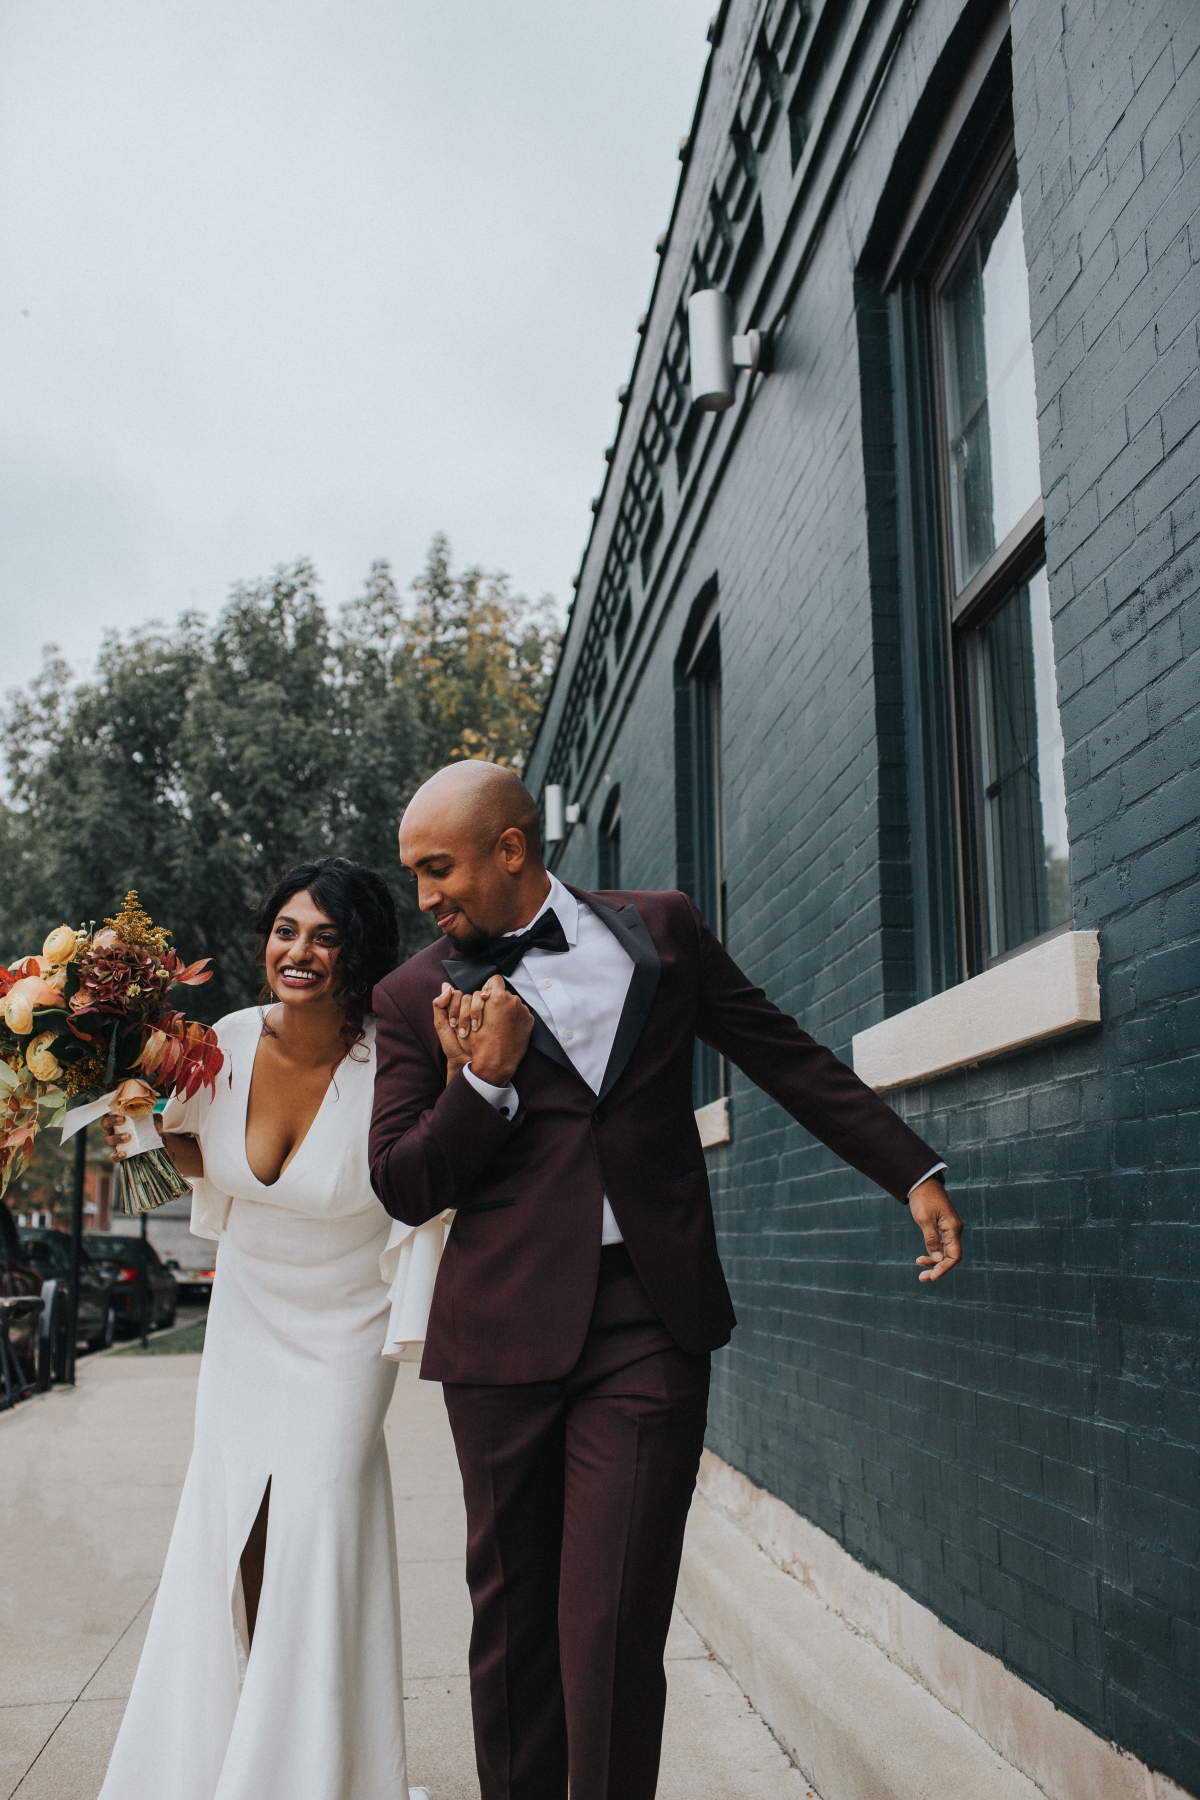 Warm Colorful Retro Mod Chicago Wedding Inspiration at The Duck Inn (54)